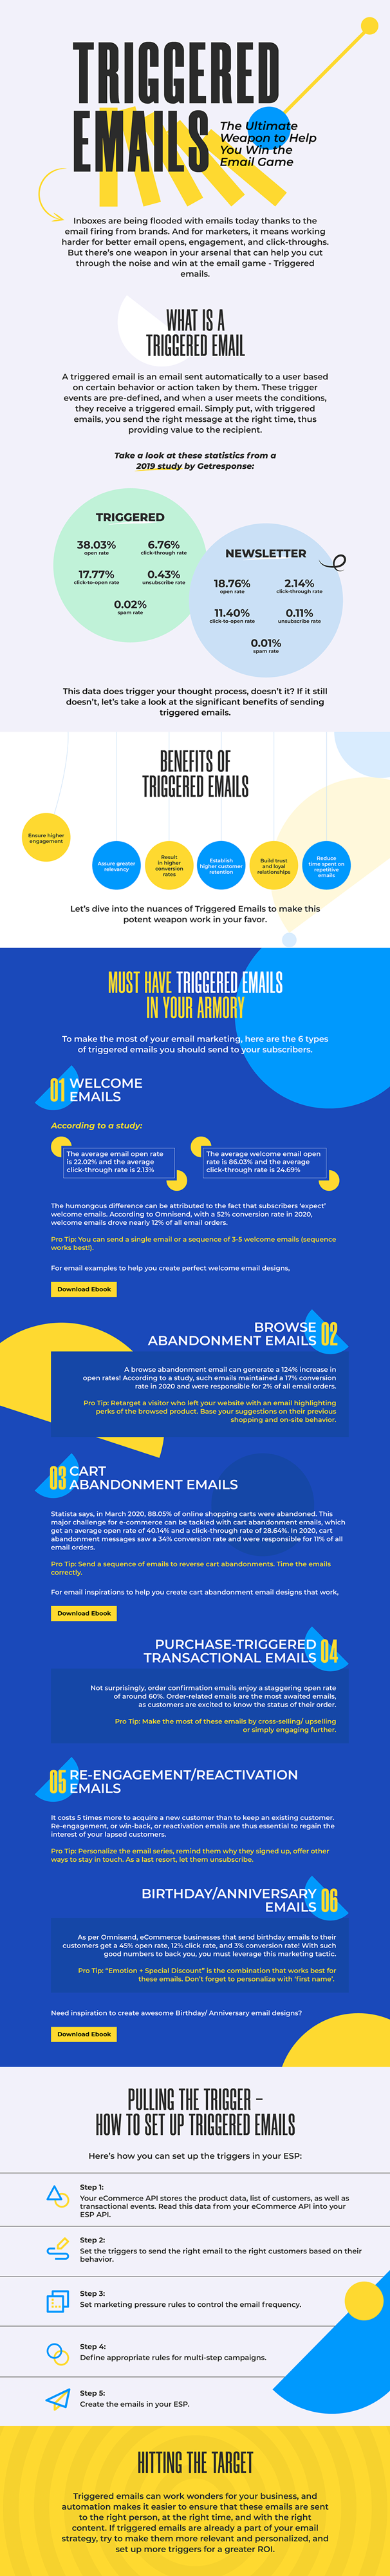 triggered emails infographic